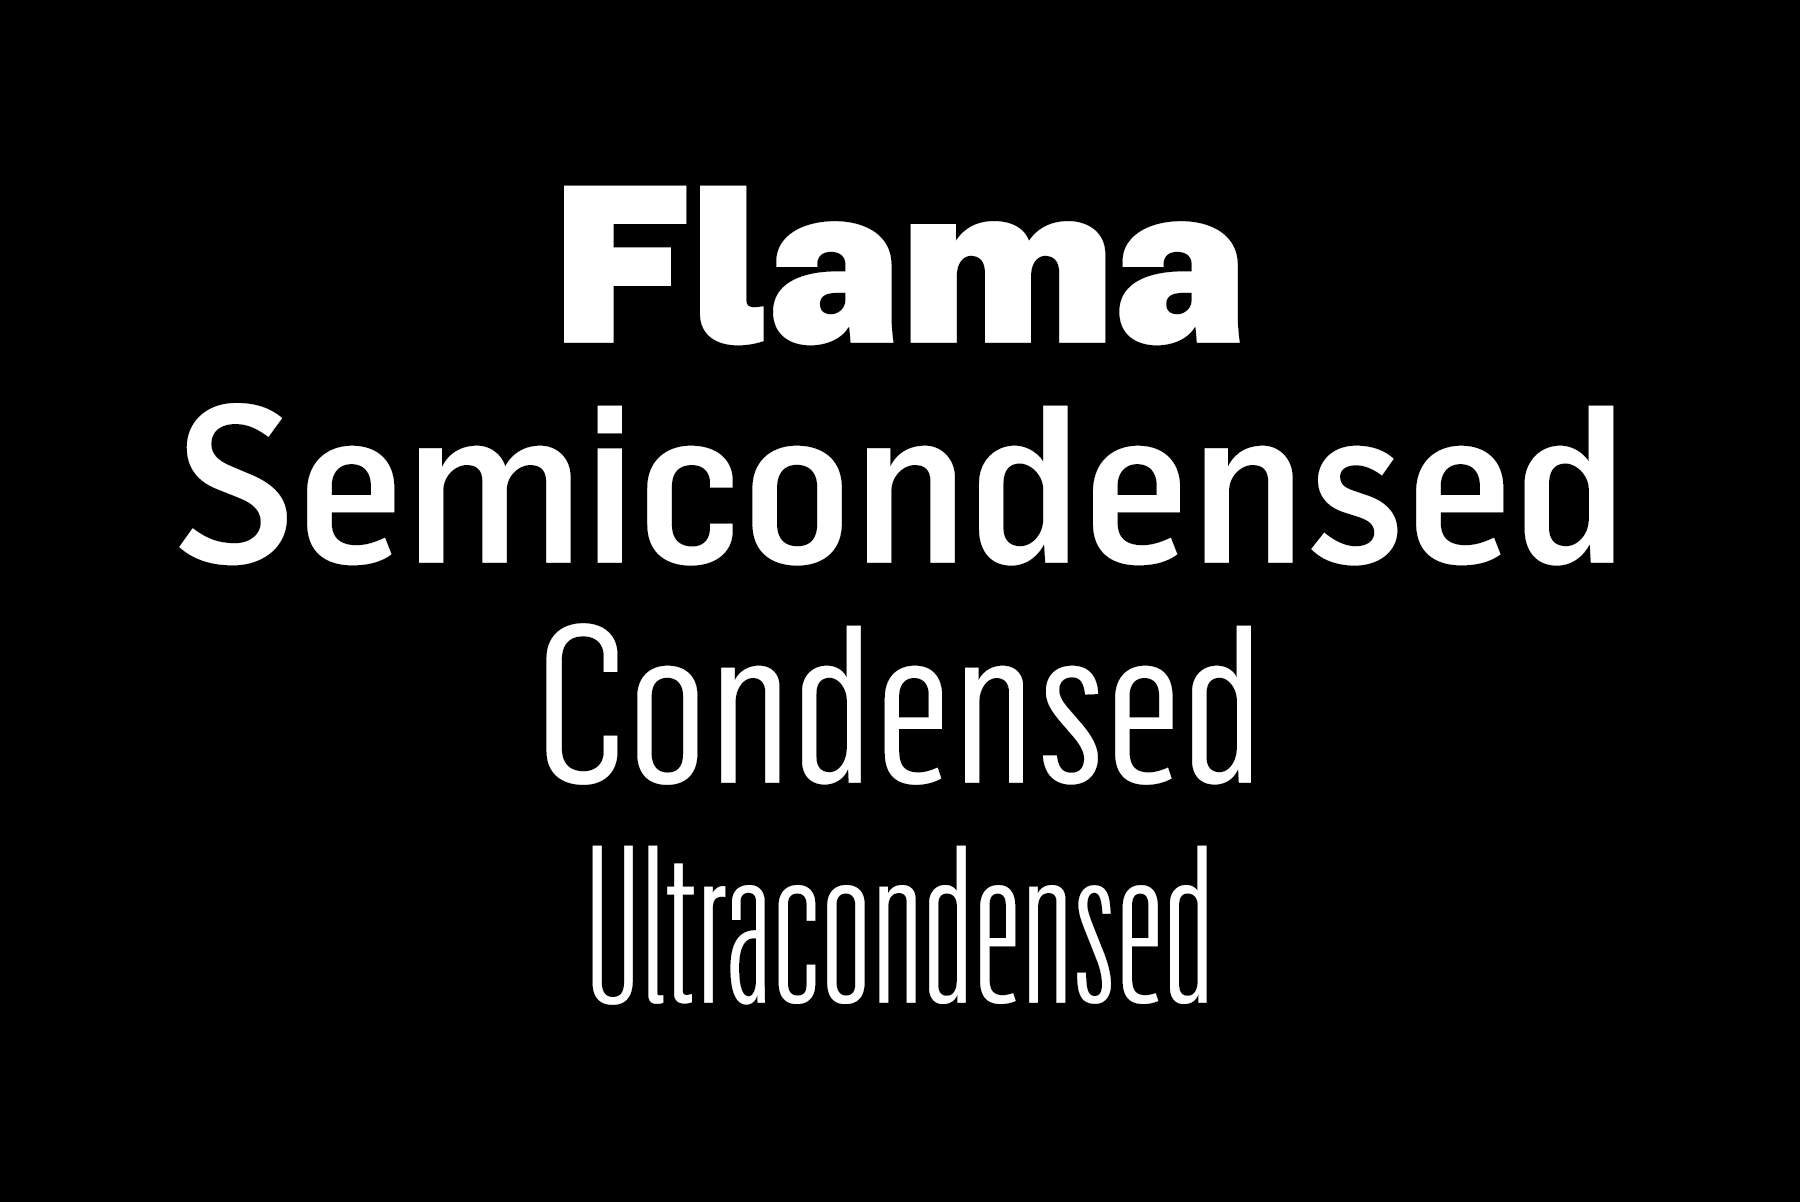 Police Flama Ultra Condensed